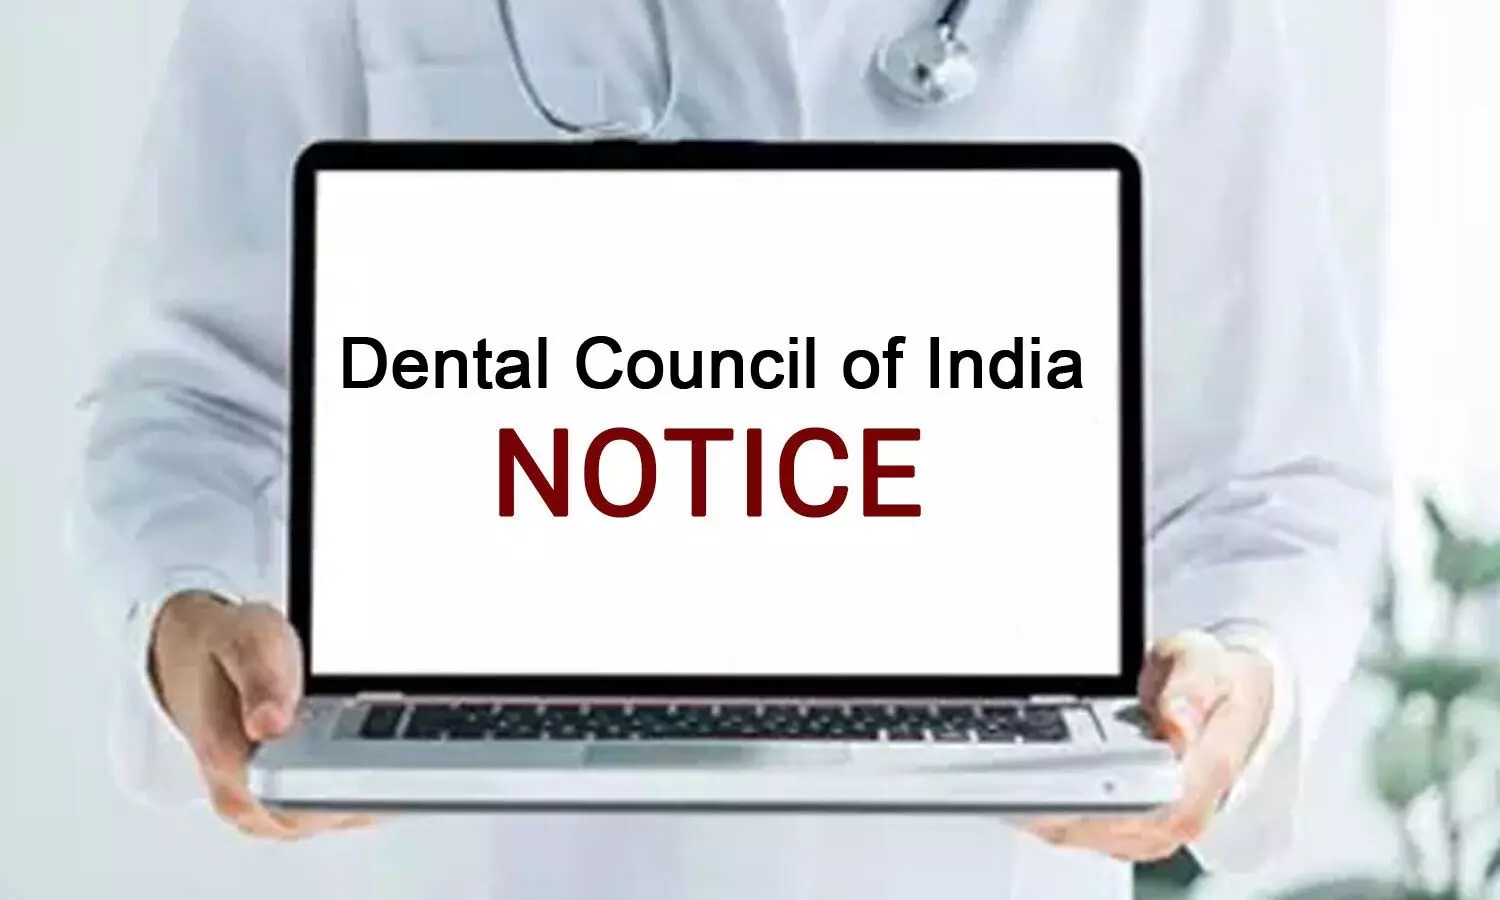 DCI finds shortcomings at Mahatma Gandhi Dental College during inspection